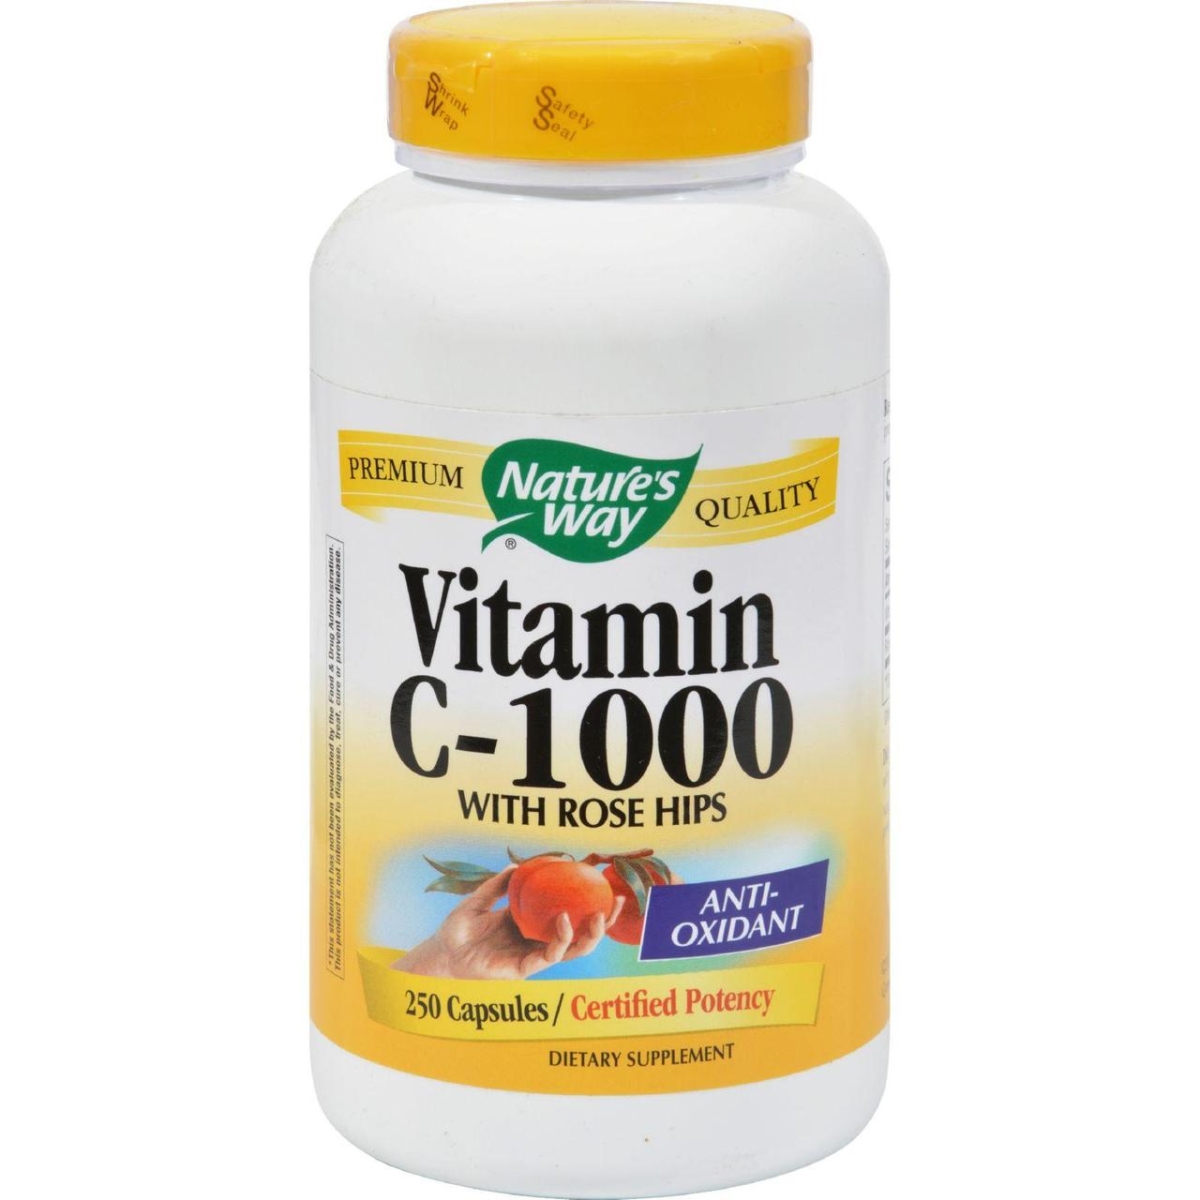 Hg0816884 1000 Mg Vitamin C With Rose Hips, 250 Capsules